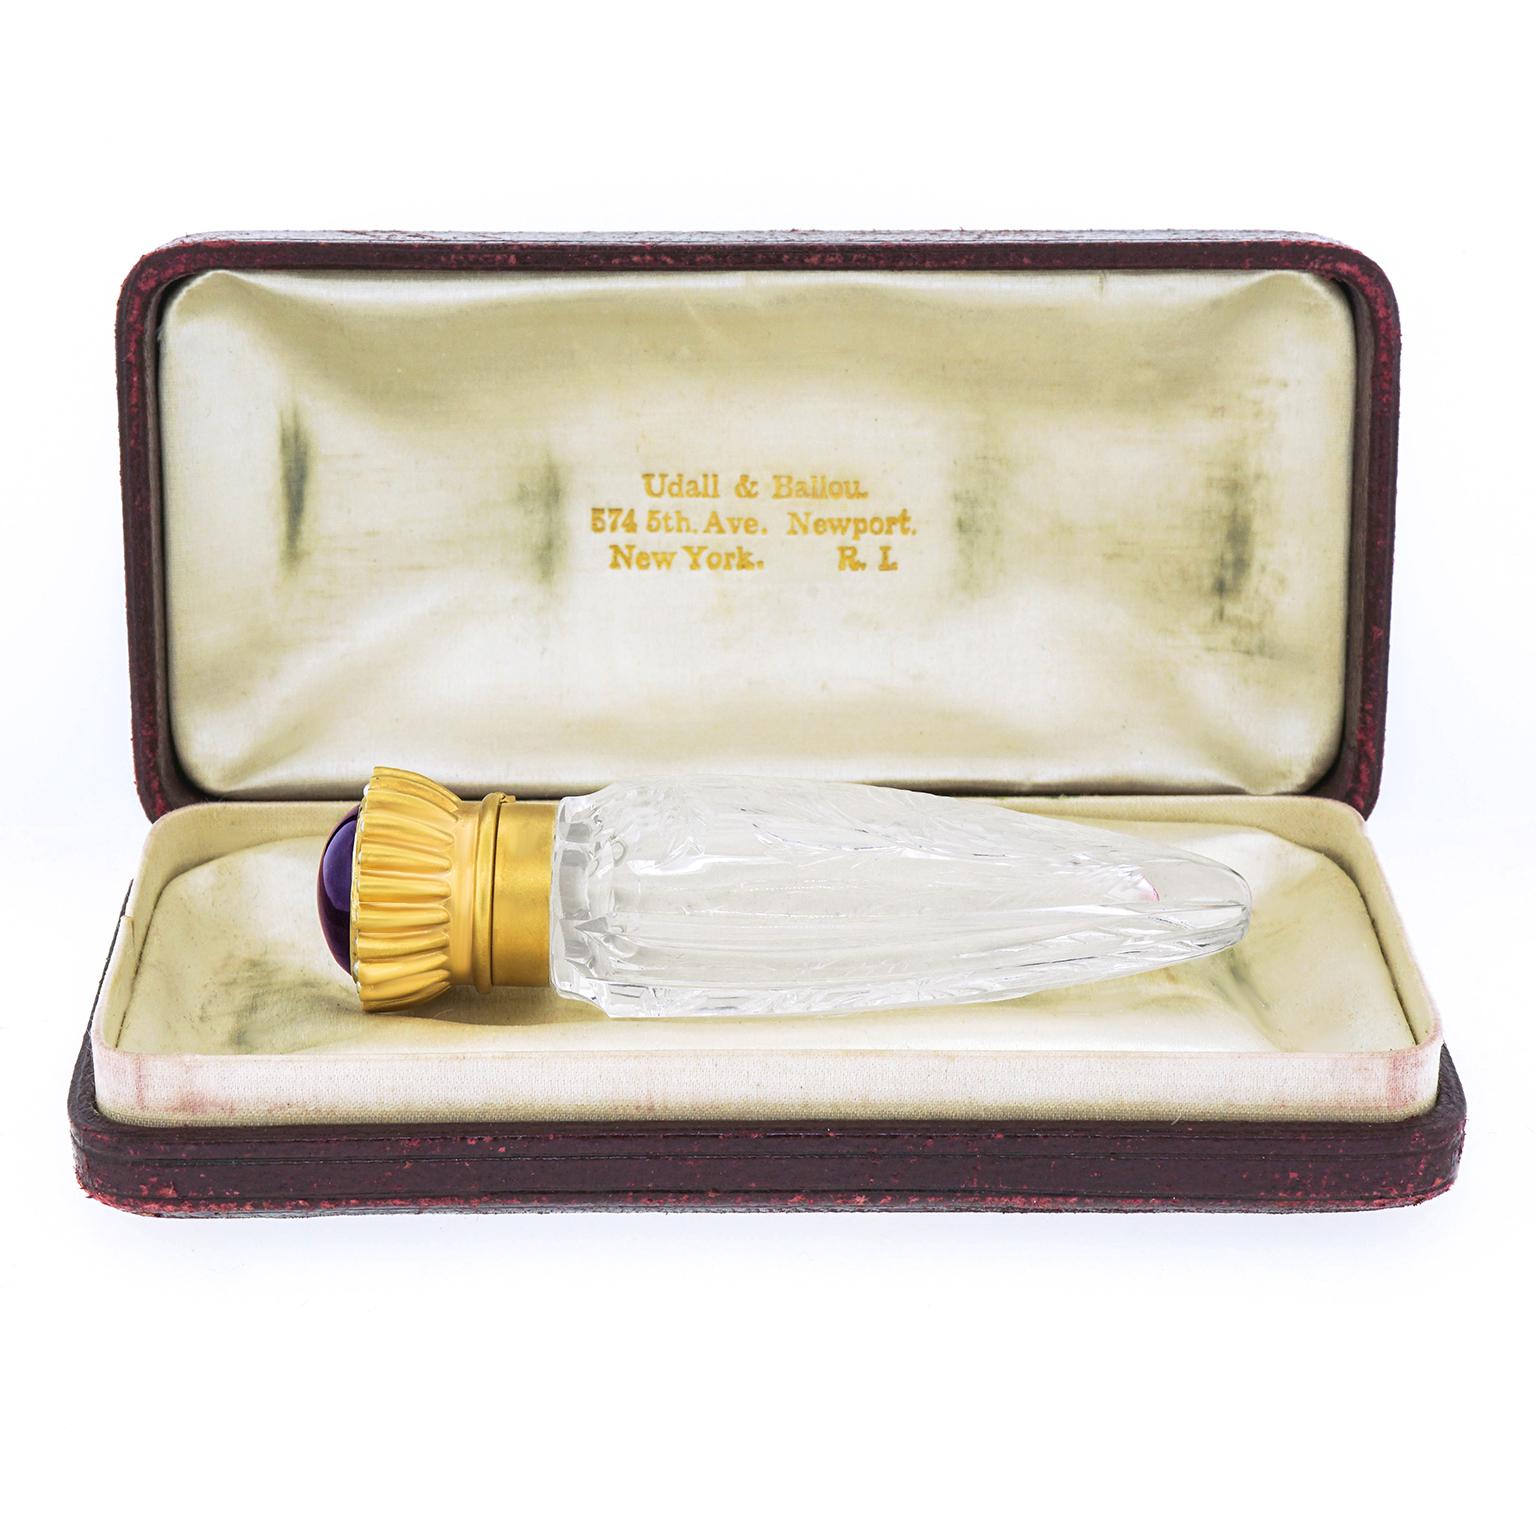 Early 20th Century Udall & Ballou Gold and Crystal Perfume